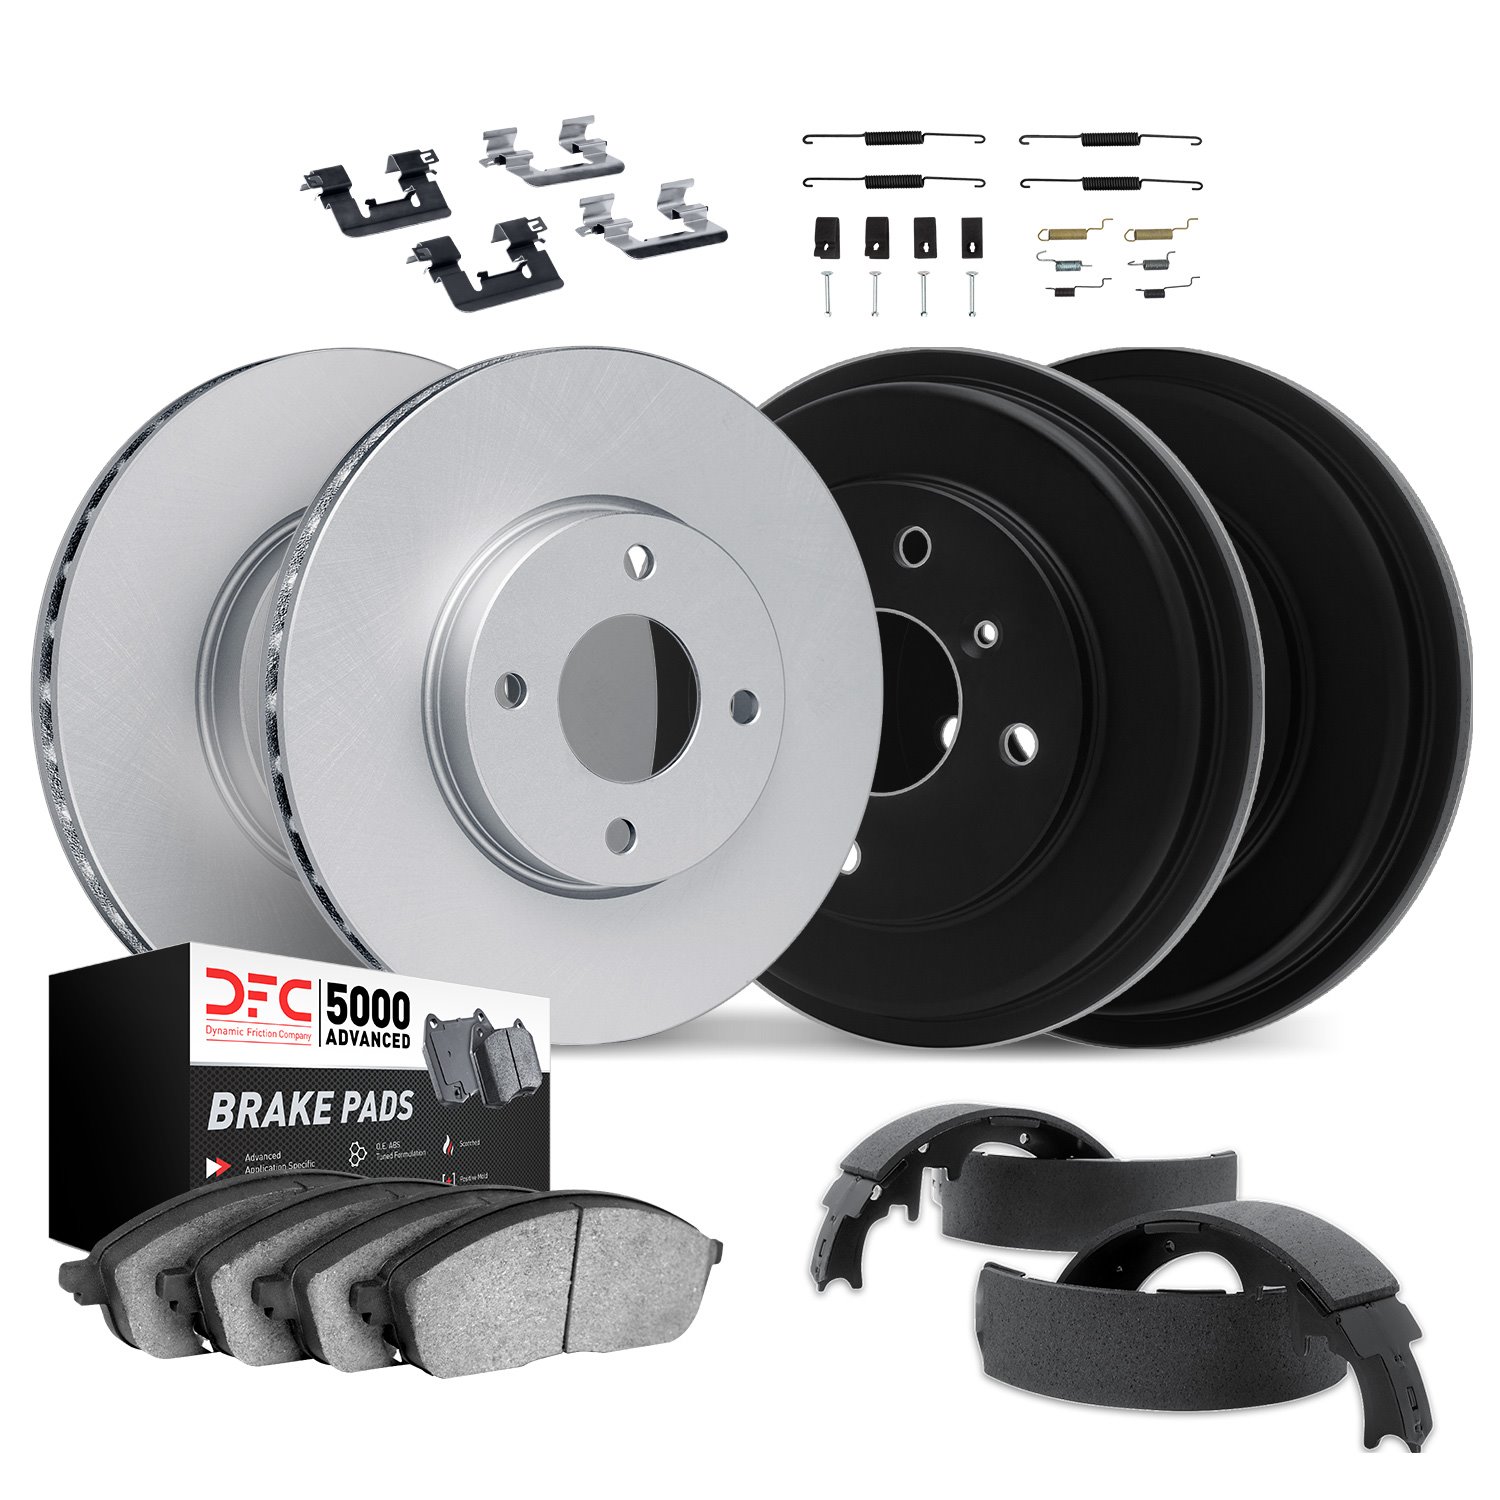 4514-59080 Geospec Brake Rotors w/5000 Advanced Brake Pads/Drums/Shoes & Hardware Kit, 1990-1997 Acura/Honda, Position: Front an